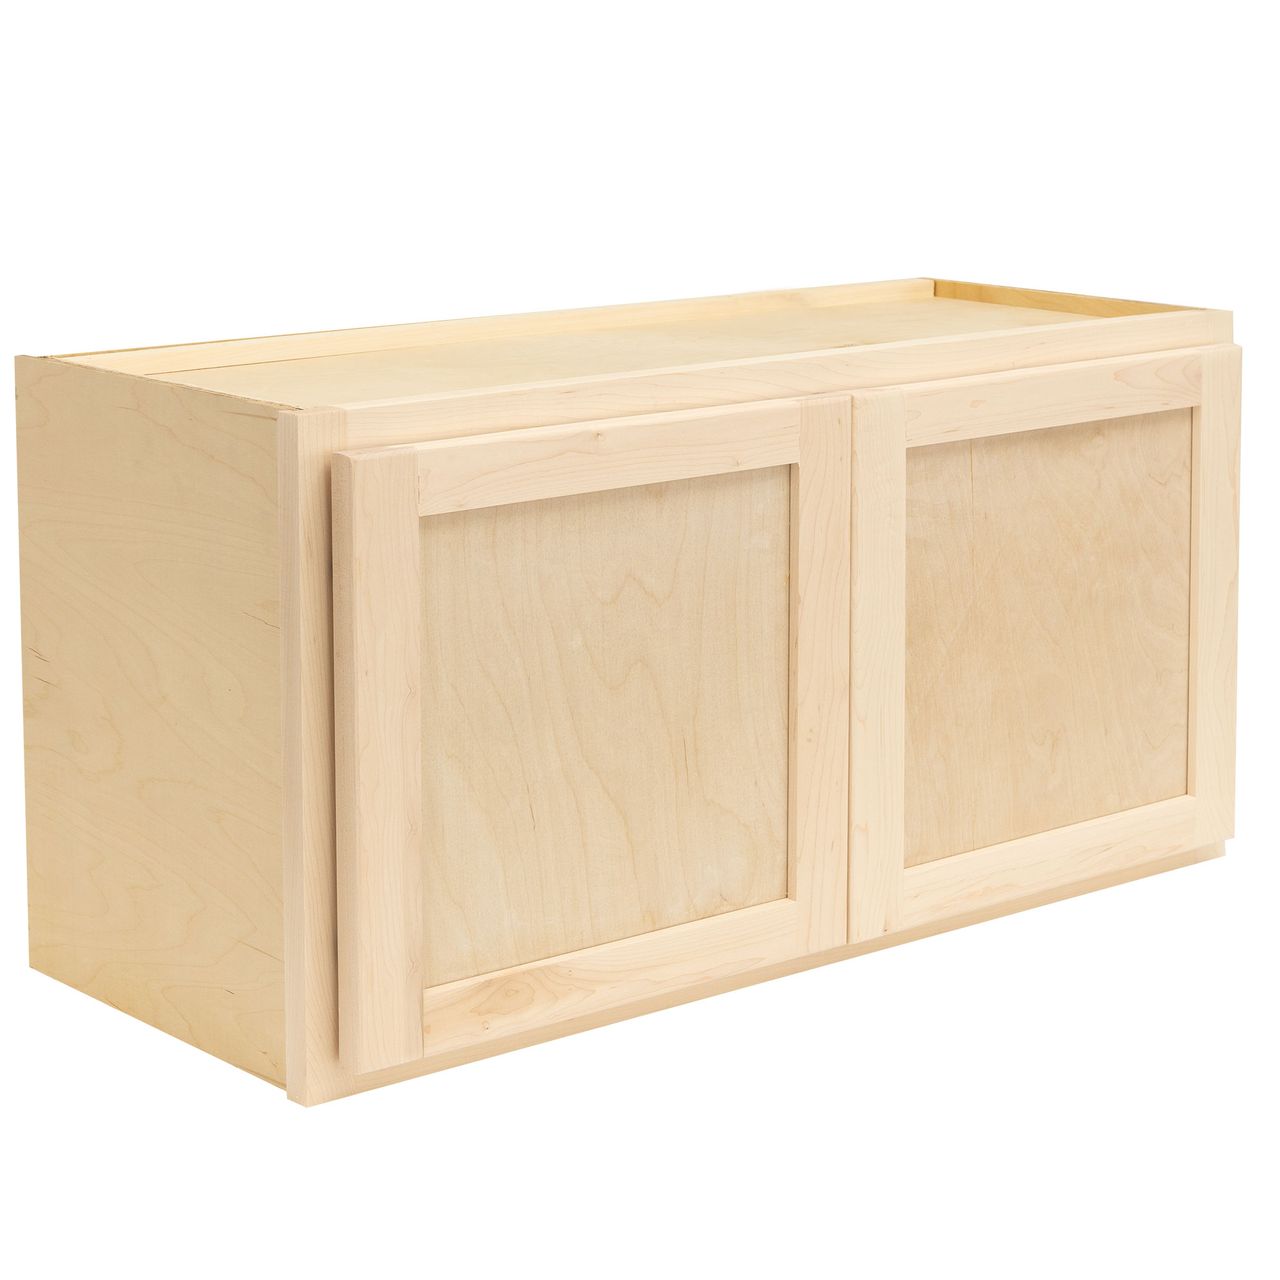 Quicklock RTA (Ready-to-Assemble) Raw Maple Microwave Wall Cabinet- 30"W x (12", 18", 24"H)